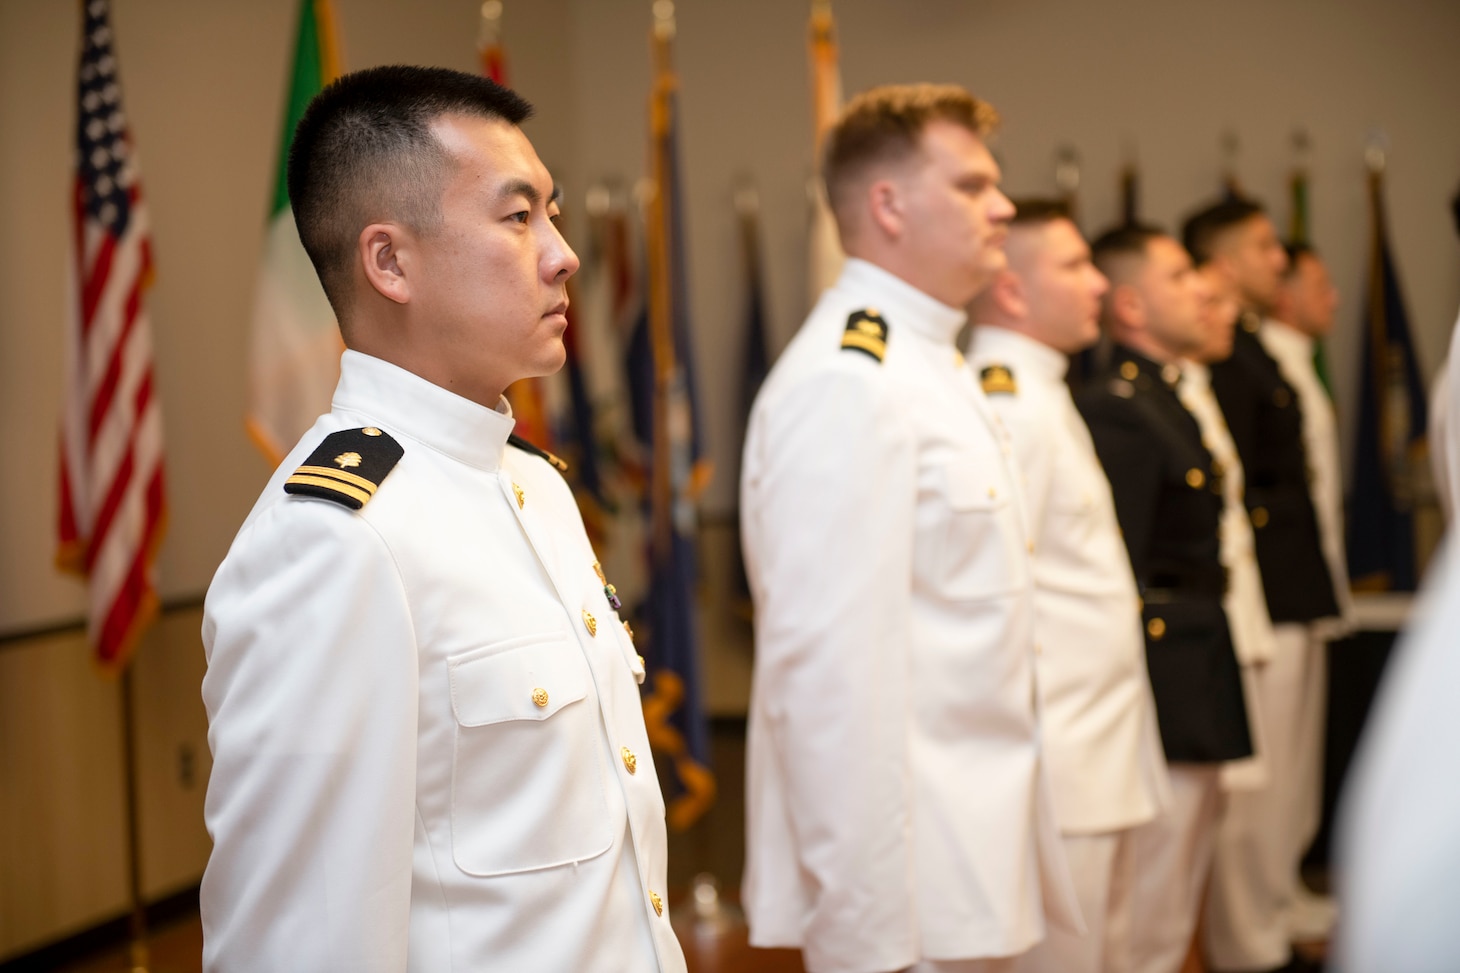 CORPUS CHRISTI, Texas - Lt. Danny Xu stands with his fellow naval aviators to recite the Flyer's Creed after receiving his Wings of Gold, Aug. 5. Xu is the first Aeromedical Dual Designator (AMDD) to transition from flight surgeon to pilot in 20 years.